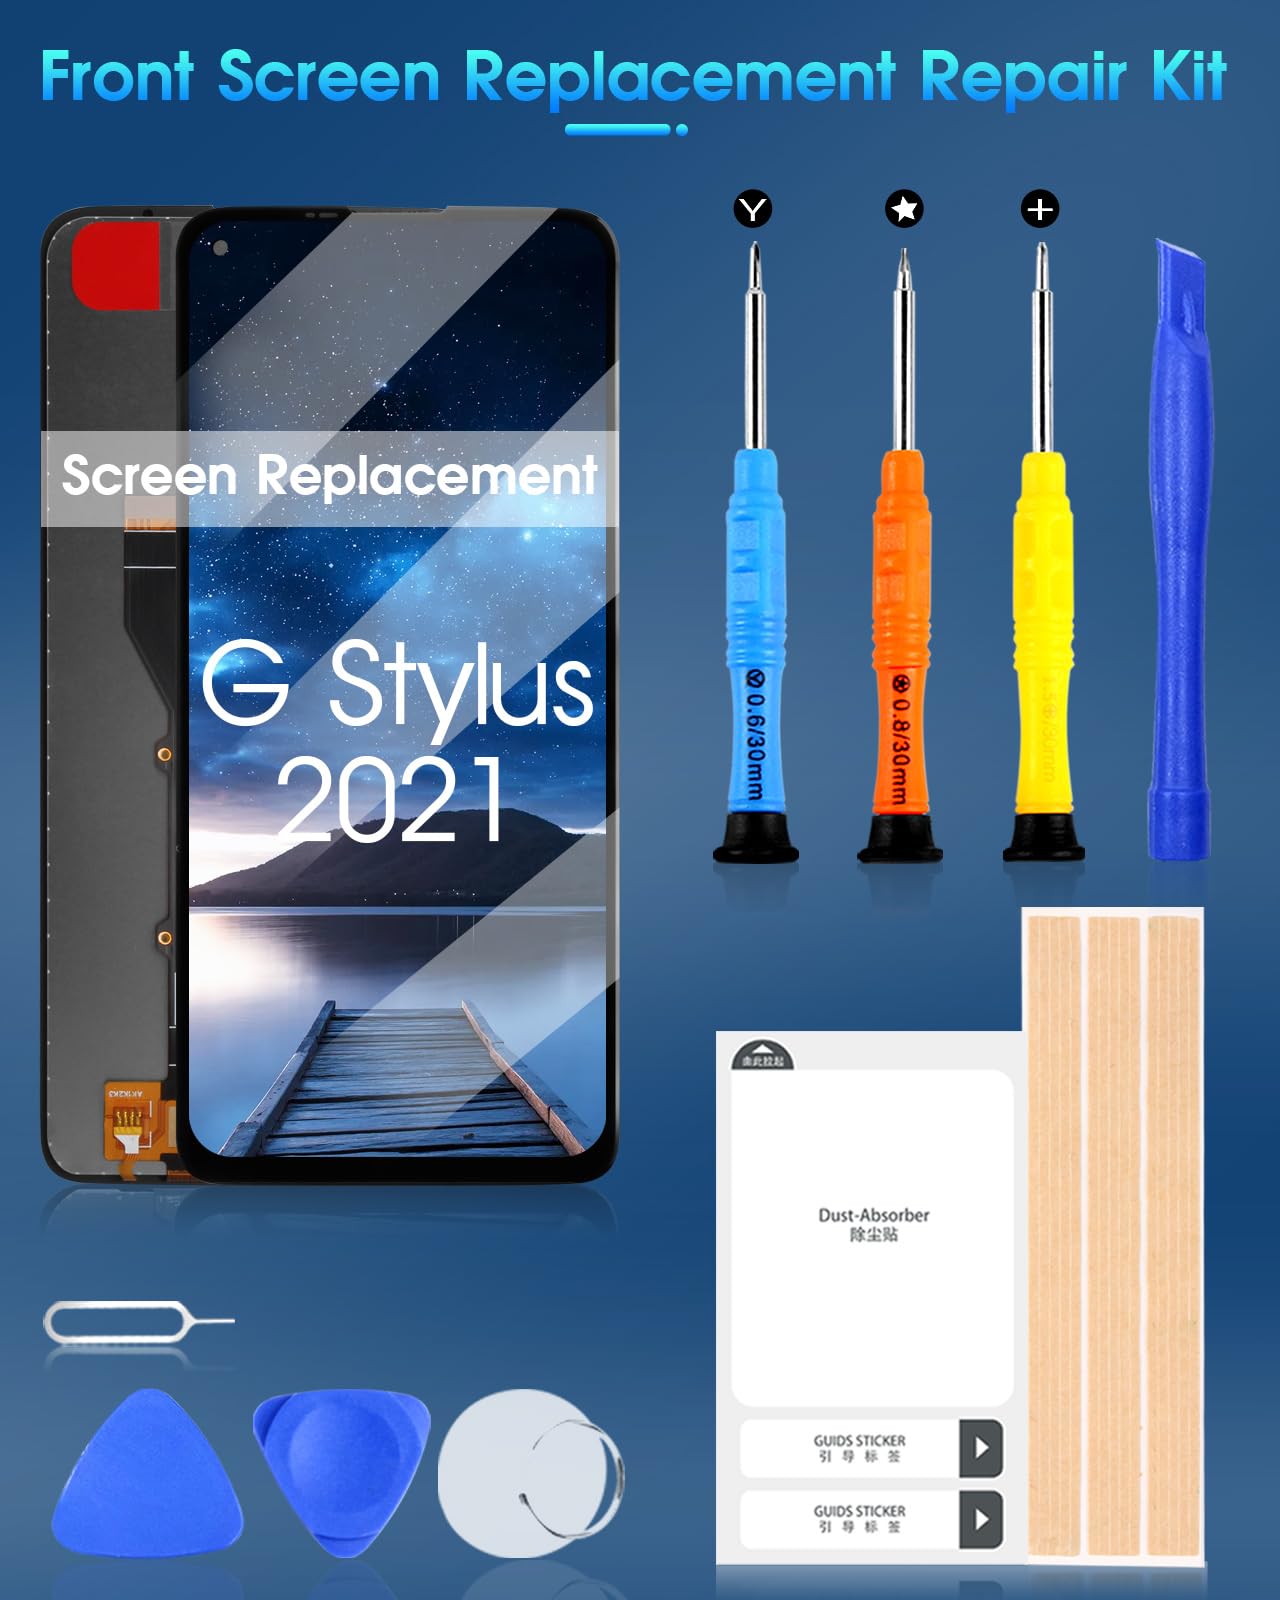 LCD Display for Motorola Moto G Stylus 2021 Screen Replacement for Moto G Stylus 2021 XT2115 XT2115-1 XT2115DL 6.8 inch Touch Screen Digitizer Glass Full Assembly with Repair Tools